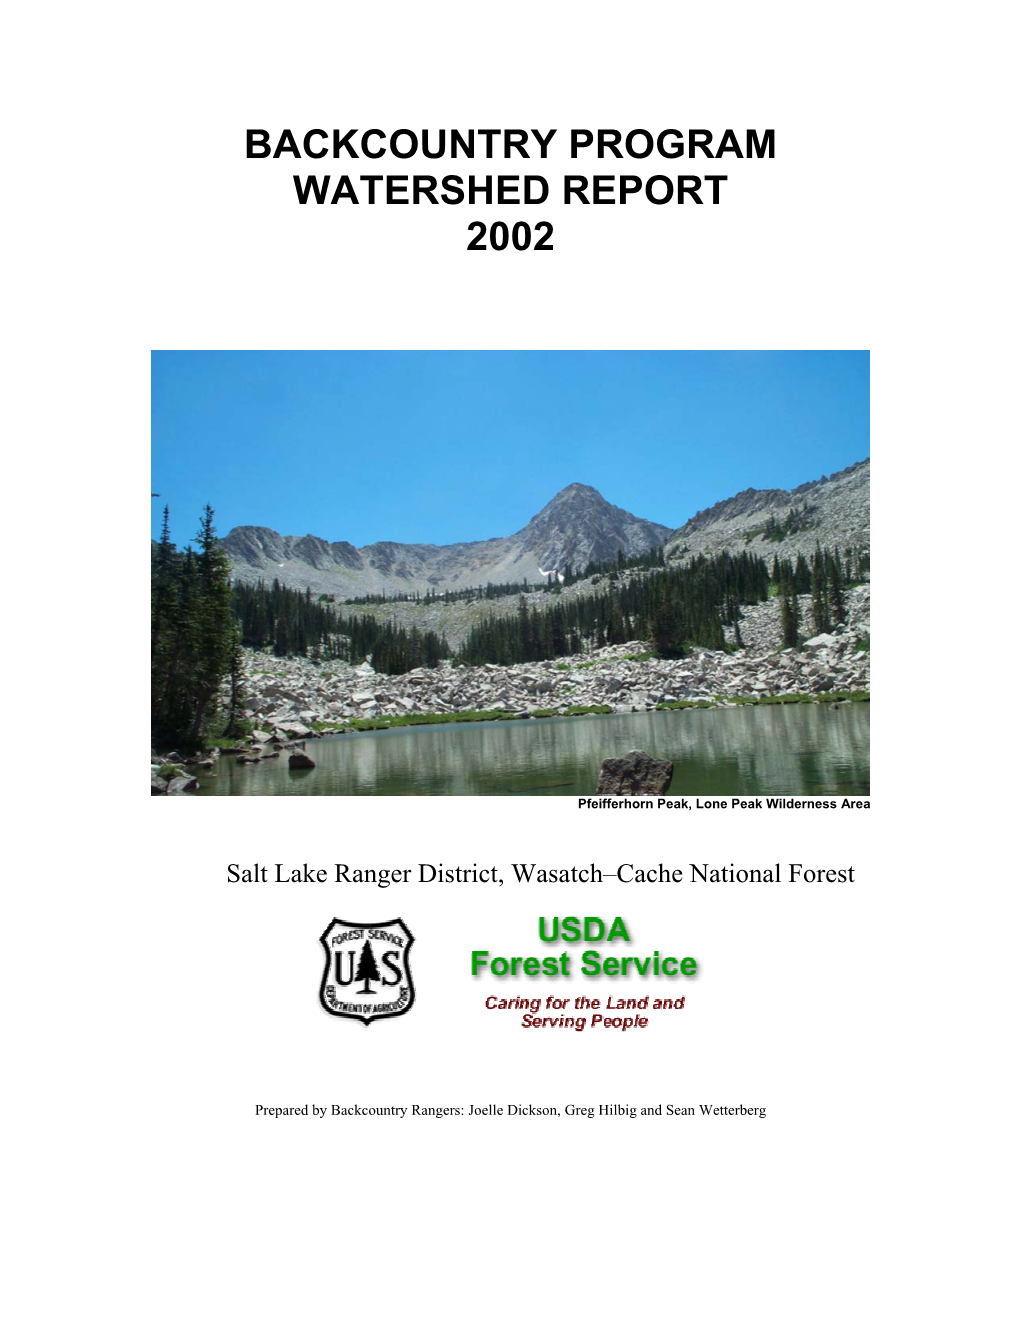 Backcountry Program Watershed Report 2002